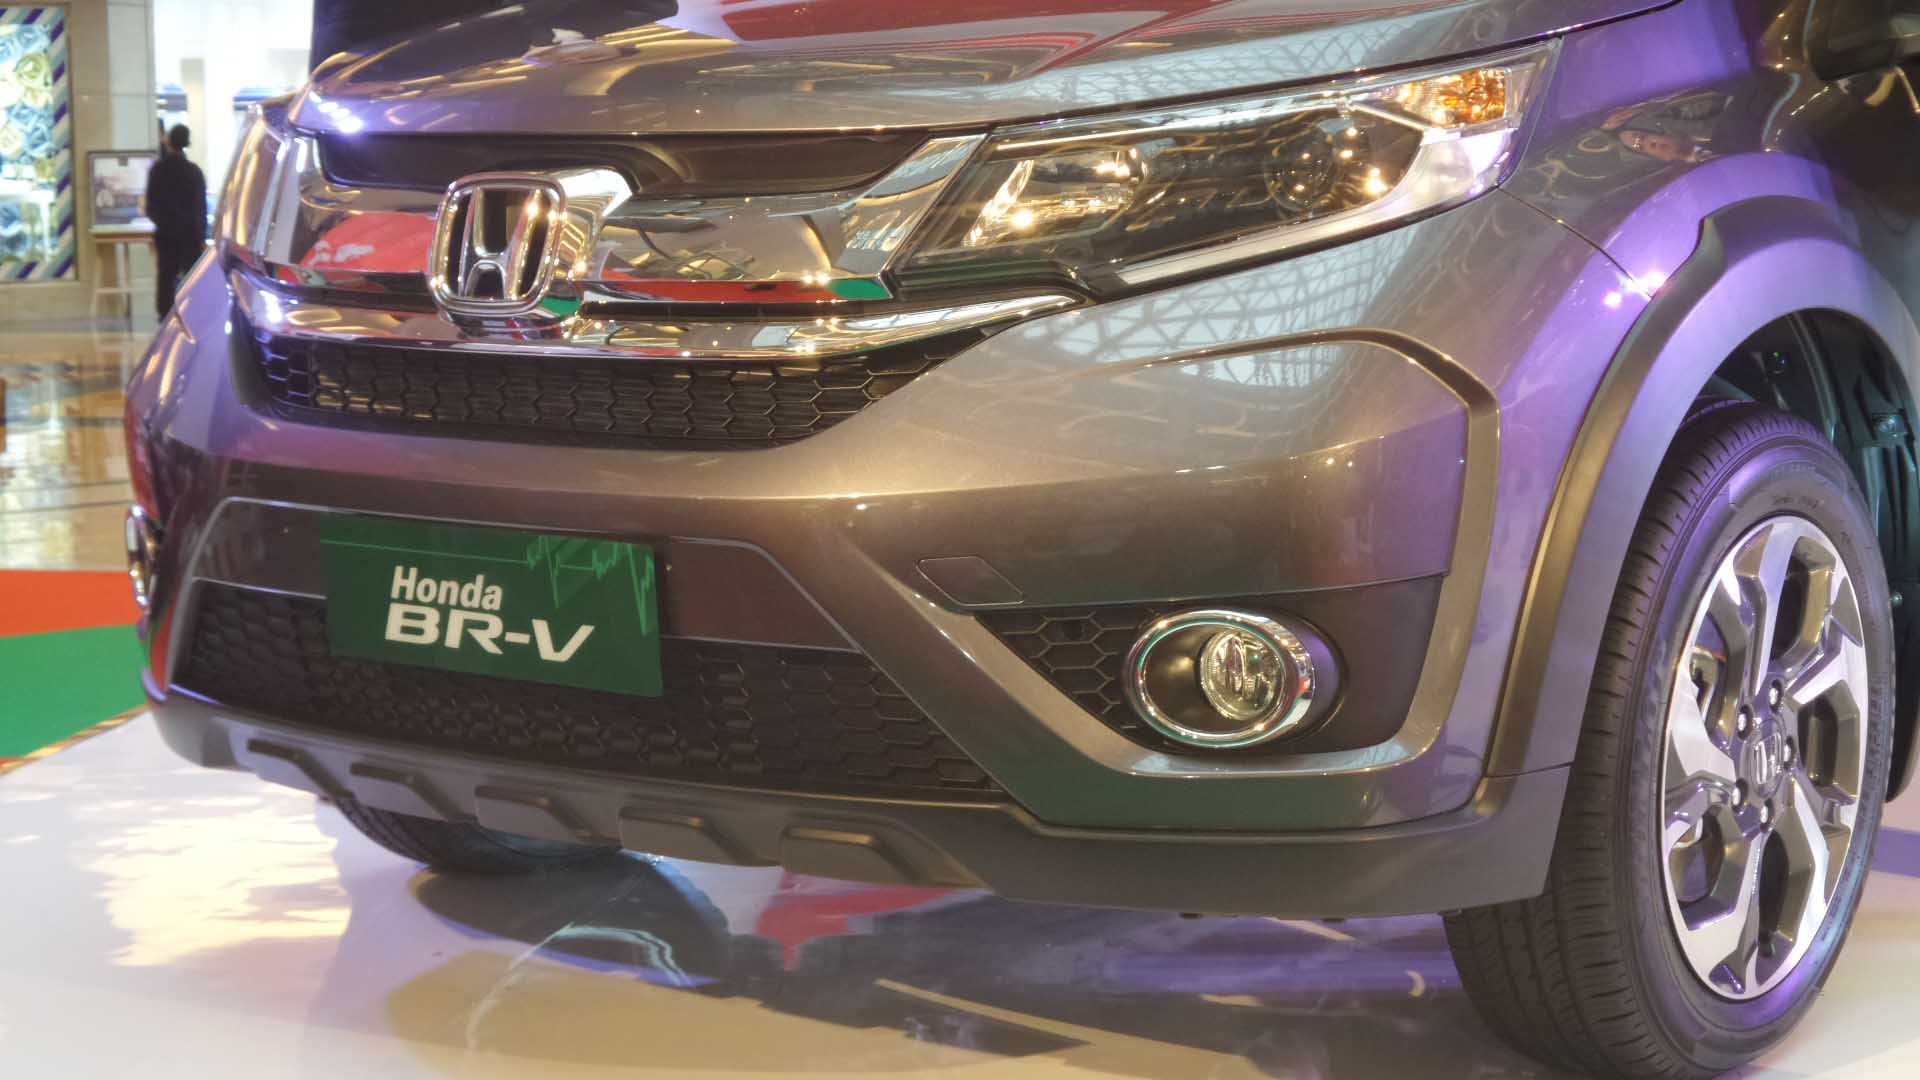 Honda BRV to Debut at 2016 Auto Expo Very Soon - 9to5 Car Wallpapers